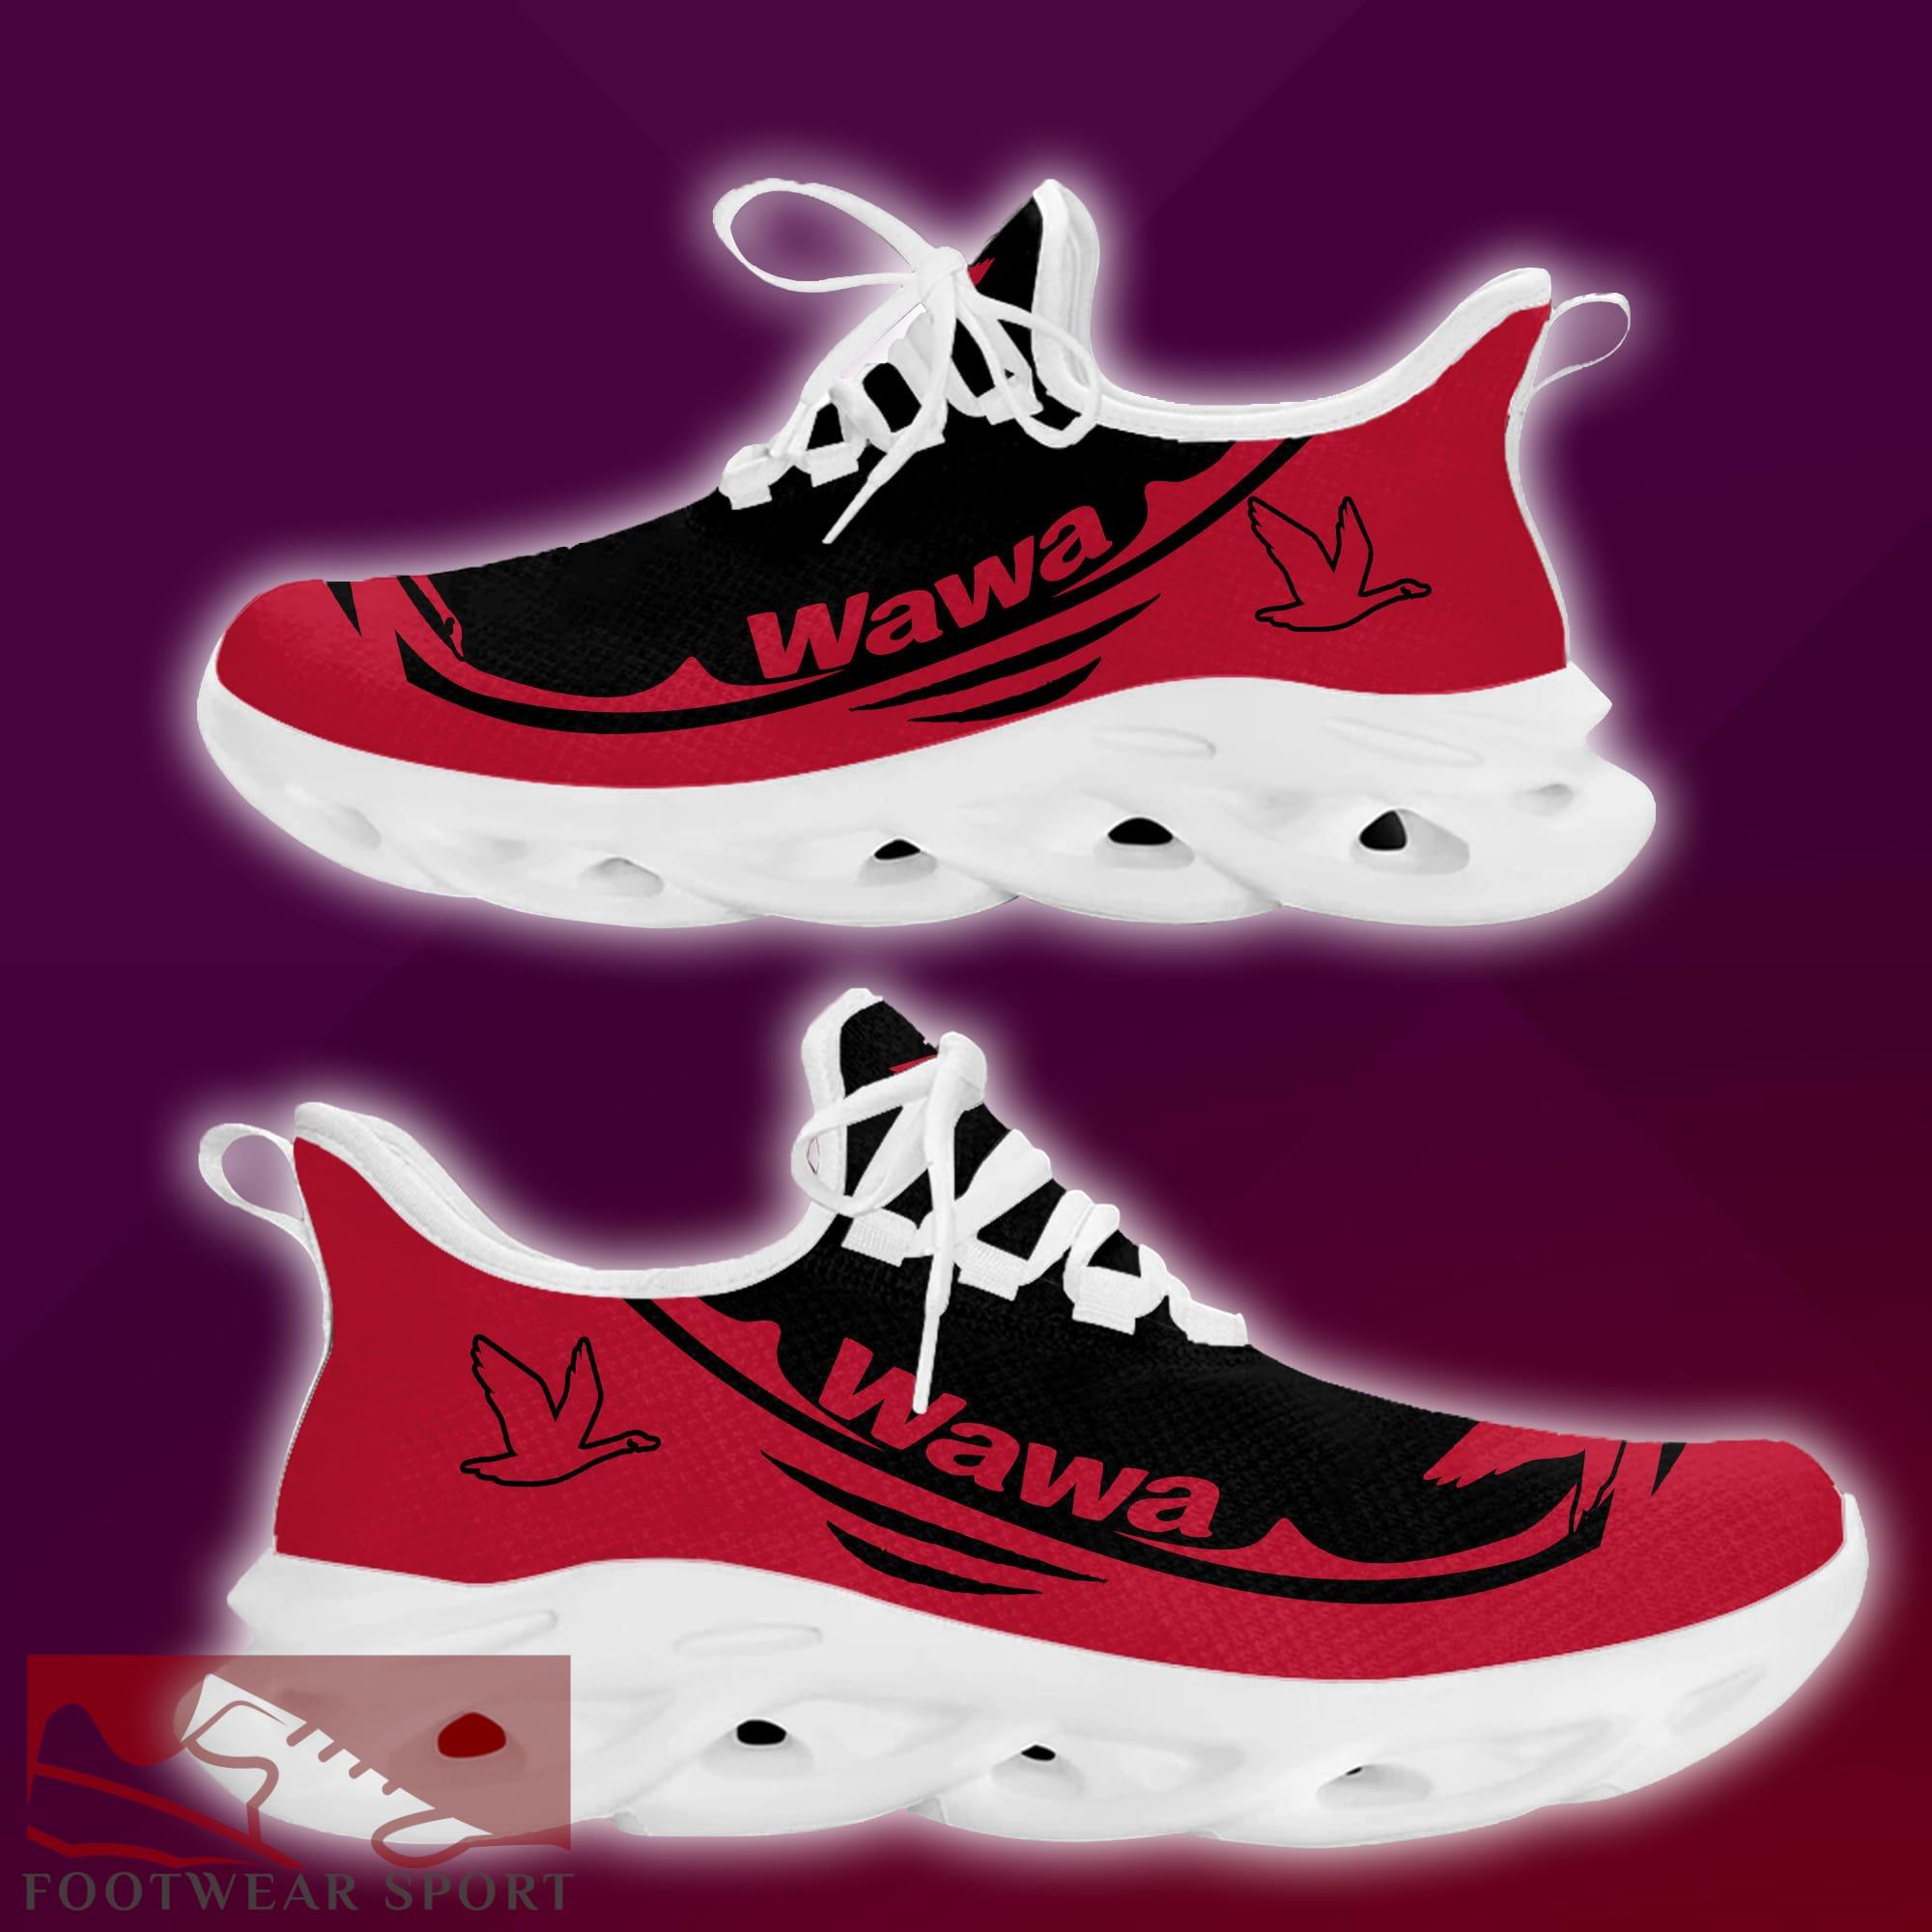 WAWA Brand New Logo Max Soul Sneakers Trendy Running Shoes Gift - WAWA New Brand Chunky Shoes Style Max Soul Sneakers Photo 2